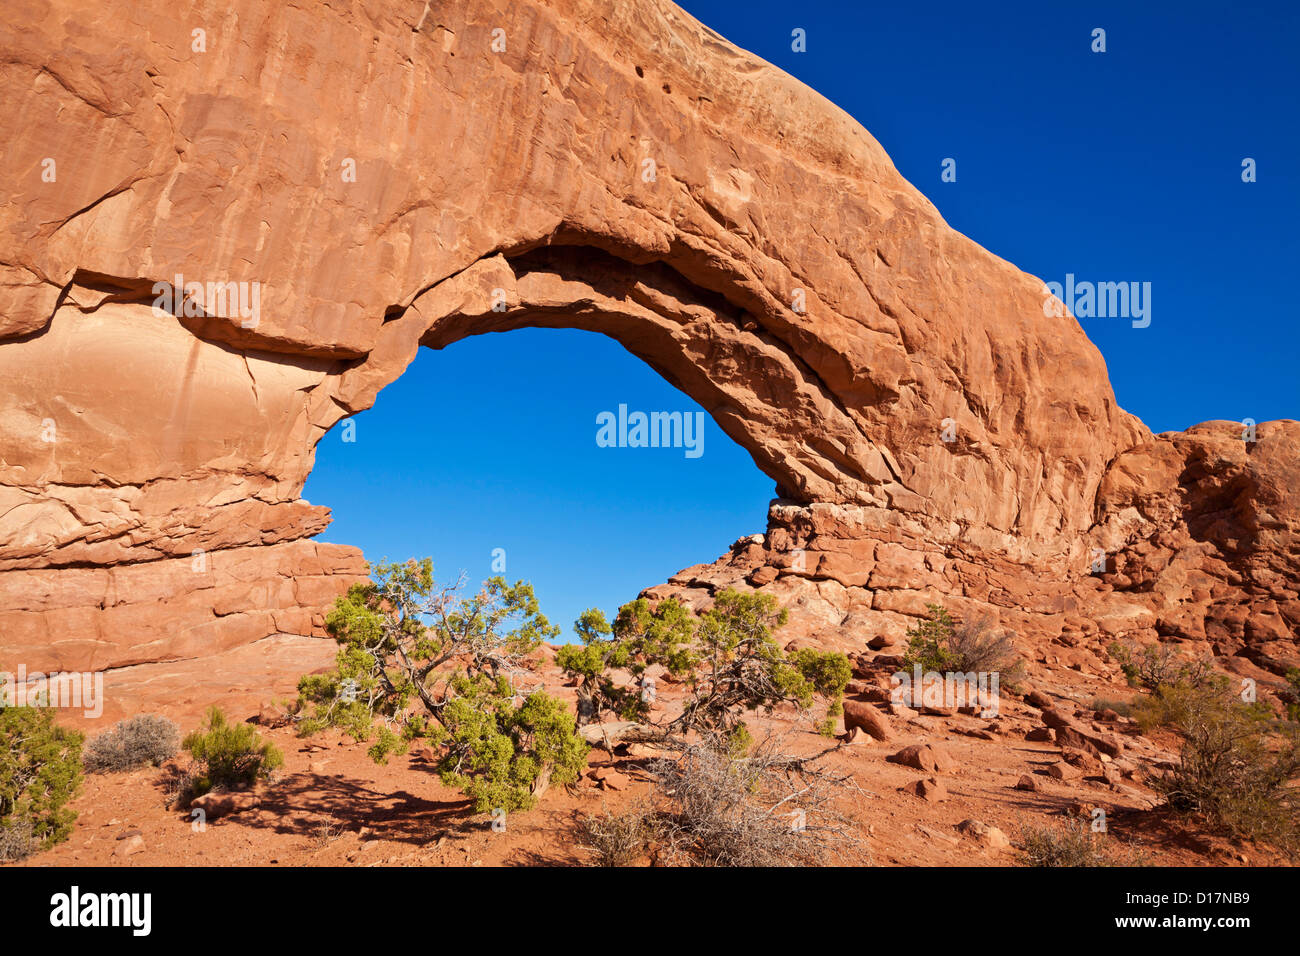 The North Window arch Arches National Park near Moab Utah North America USA United States of America Stock Photo